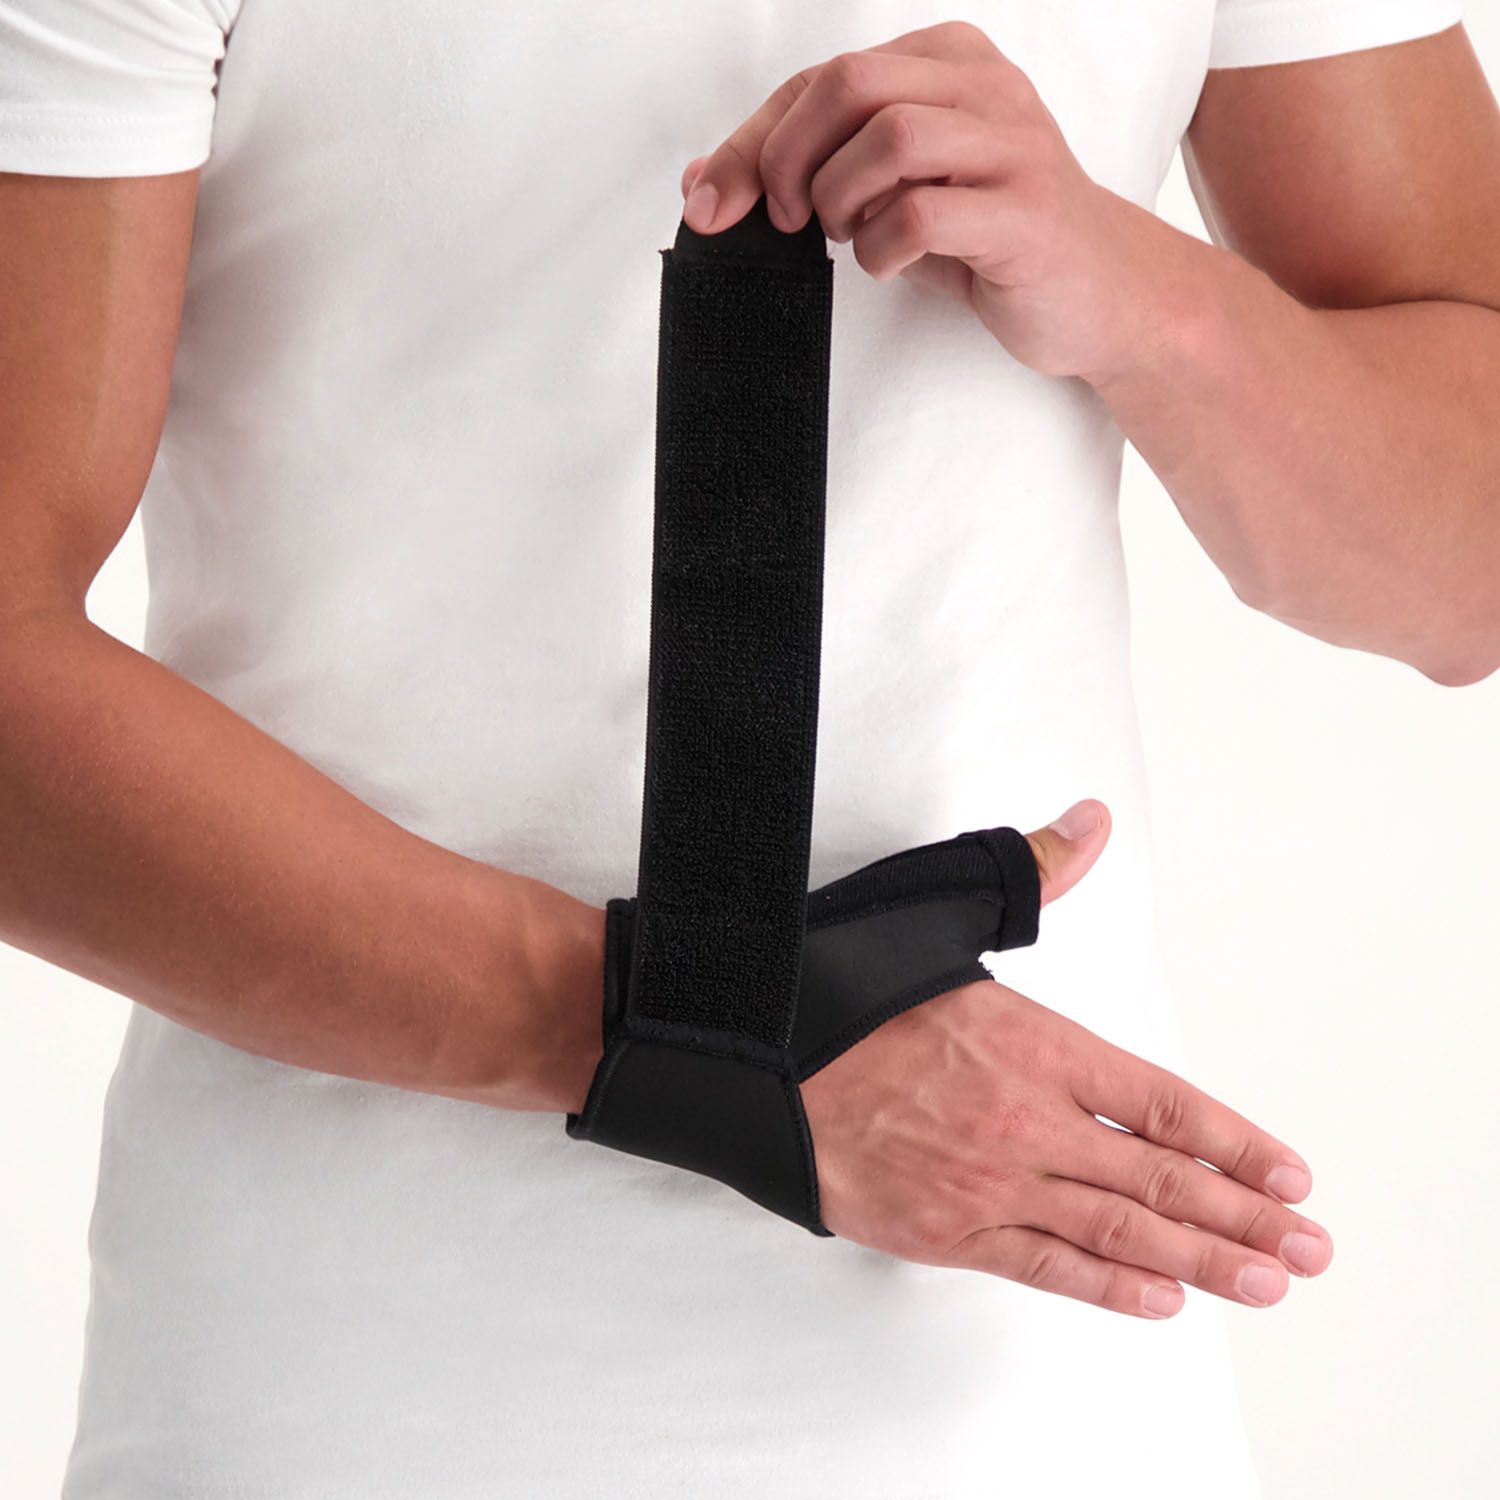 putting on the dunimed thumb wrist support black 